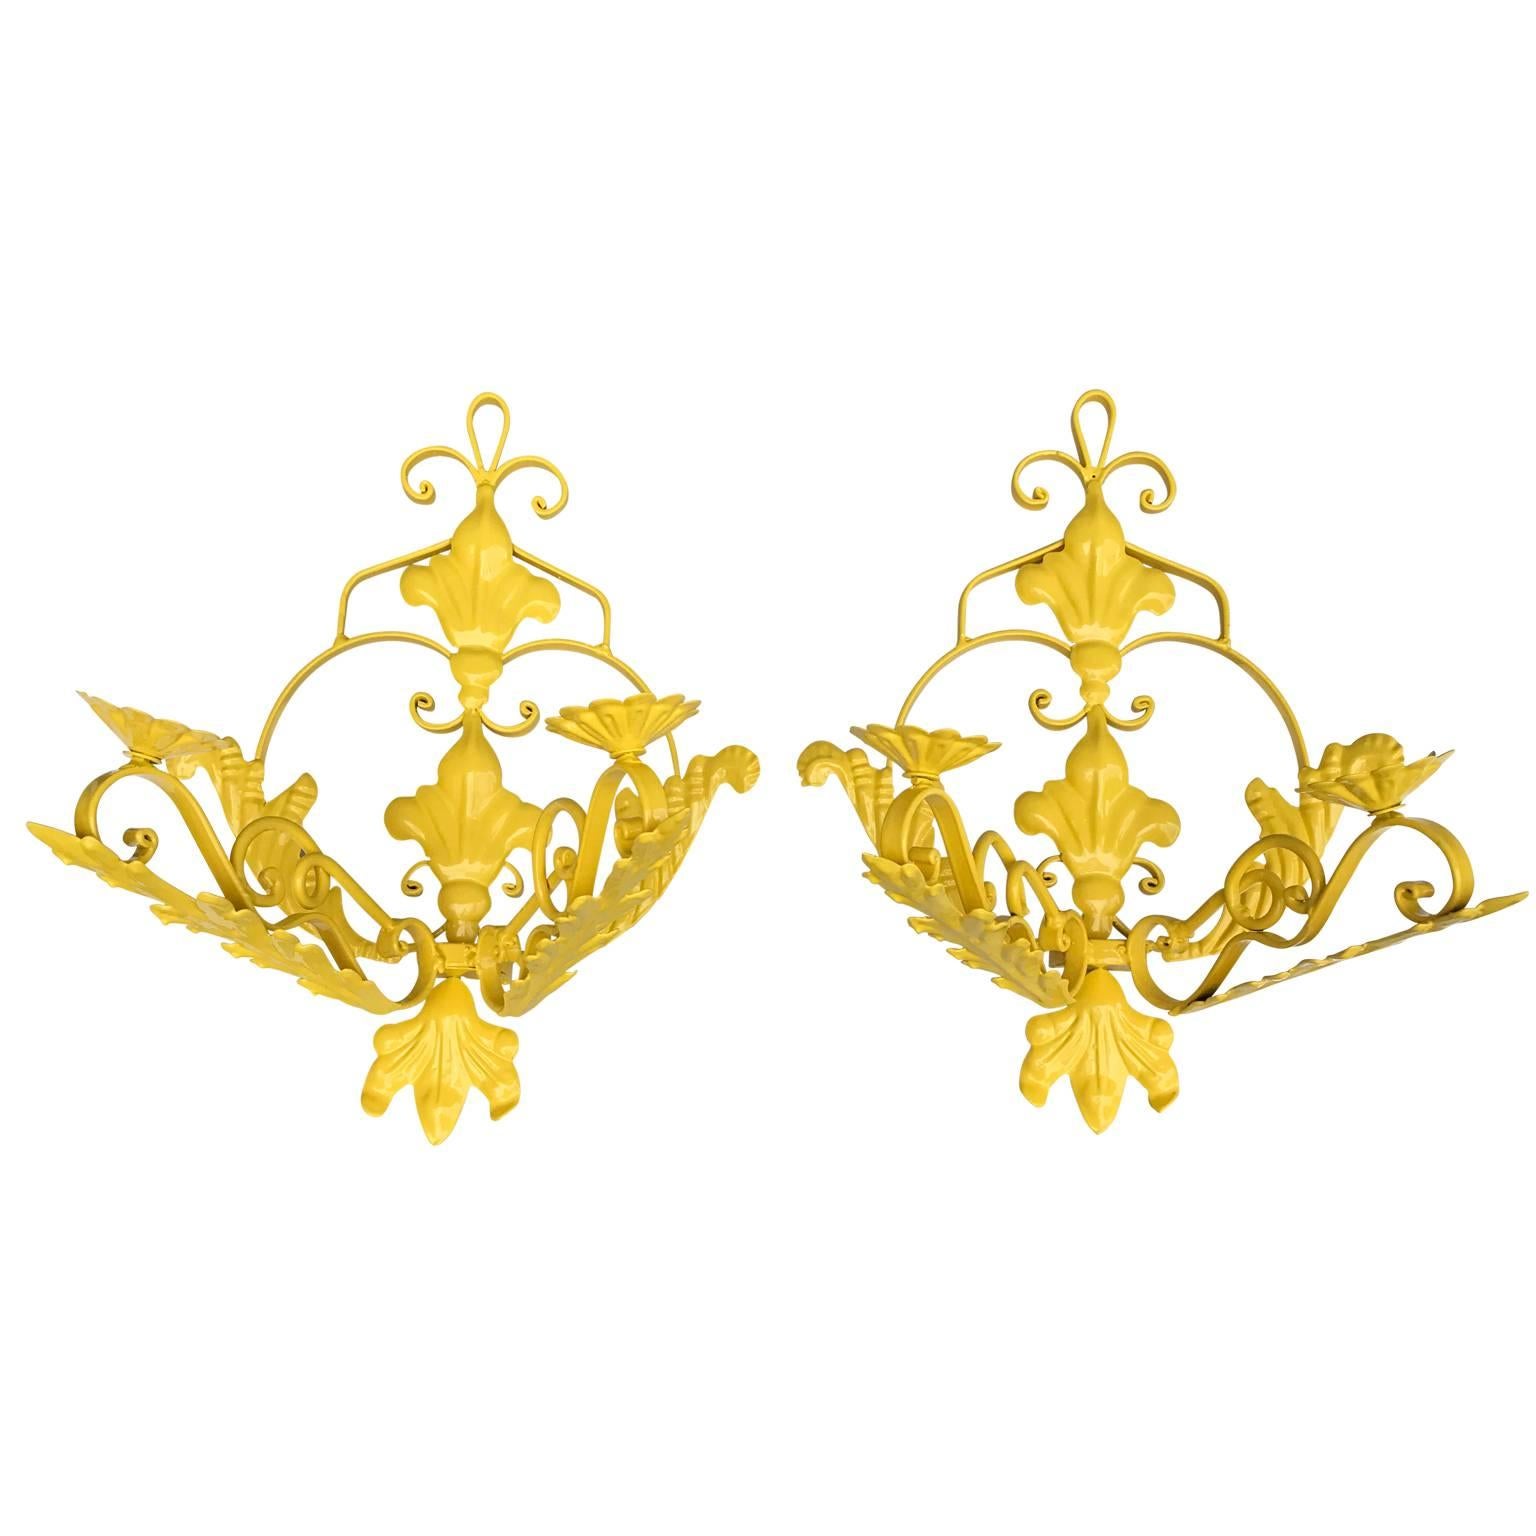 Pair Of Bright Sunshine Yellow Wall Sconces 